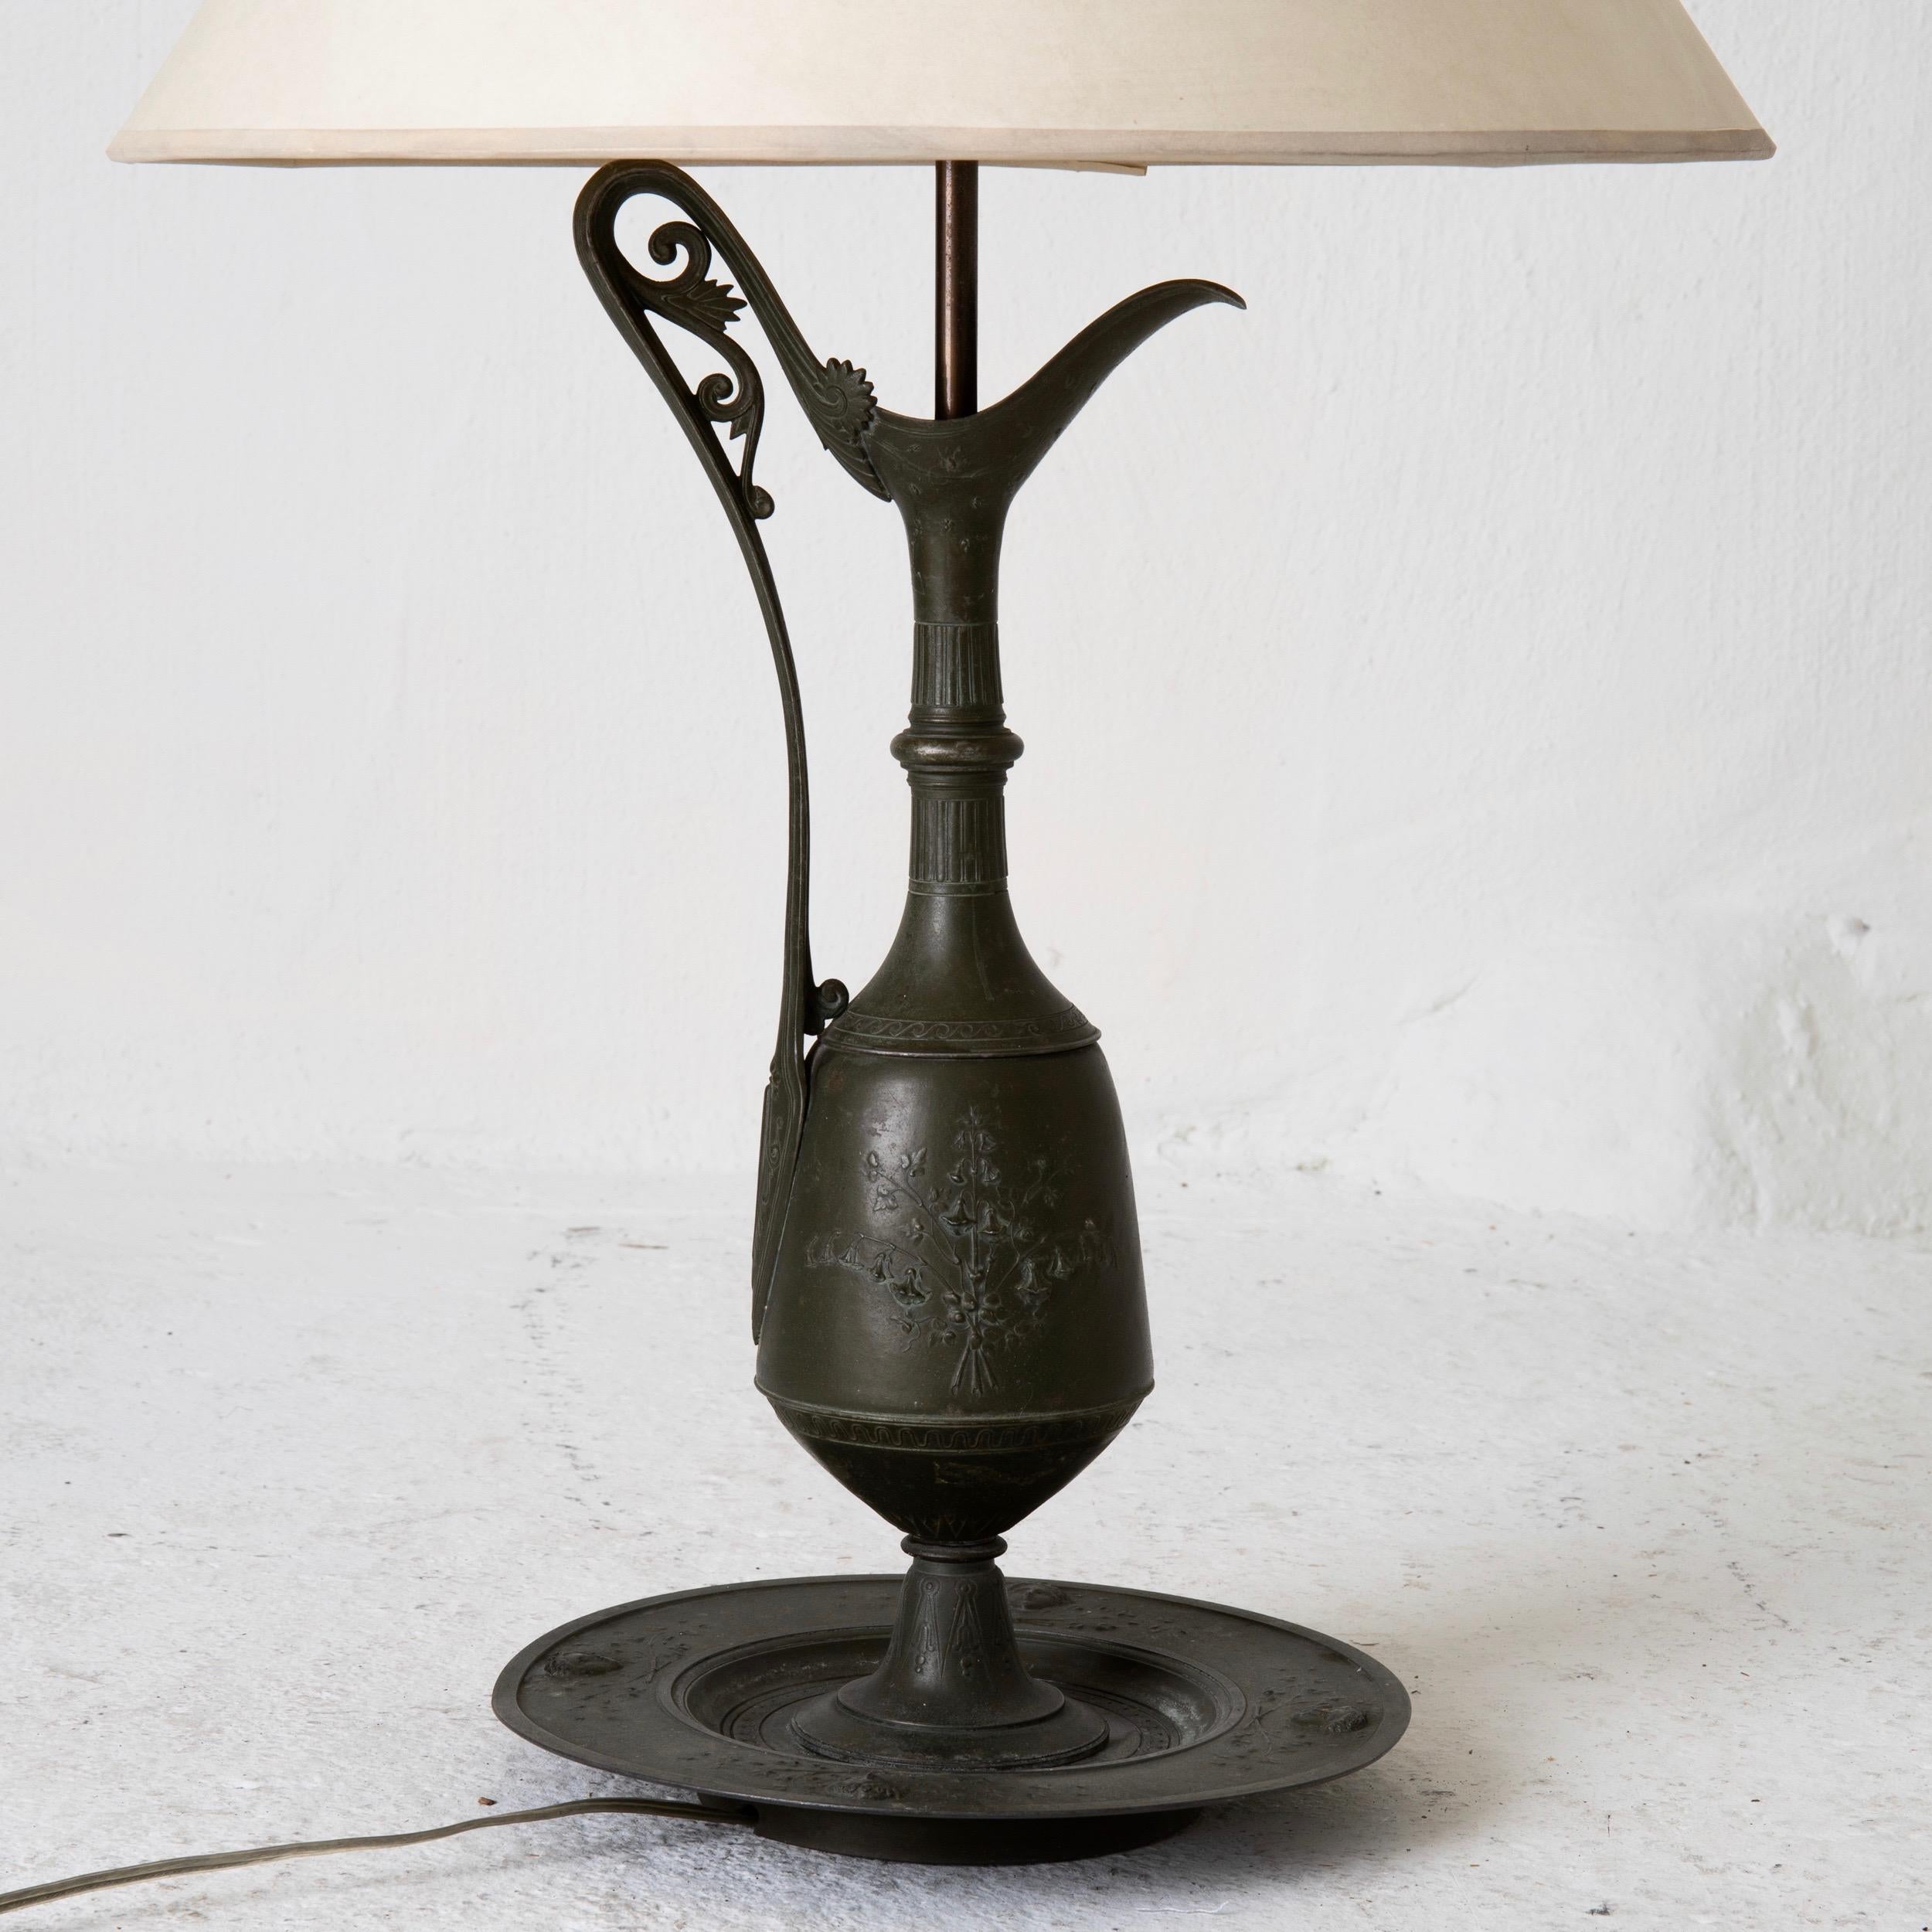 A pair of table lamps made in the neoclassical style during the early 20th century. Pitcher shaped bases. Dark metal with classical motifs. Cream colored shades.

 